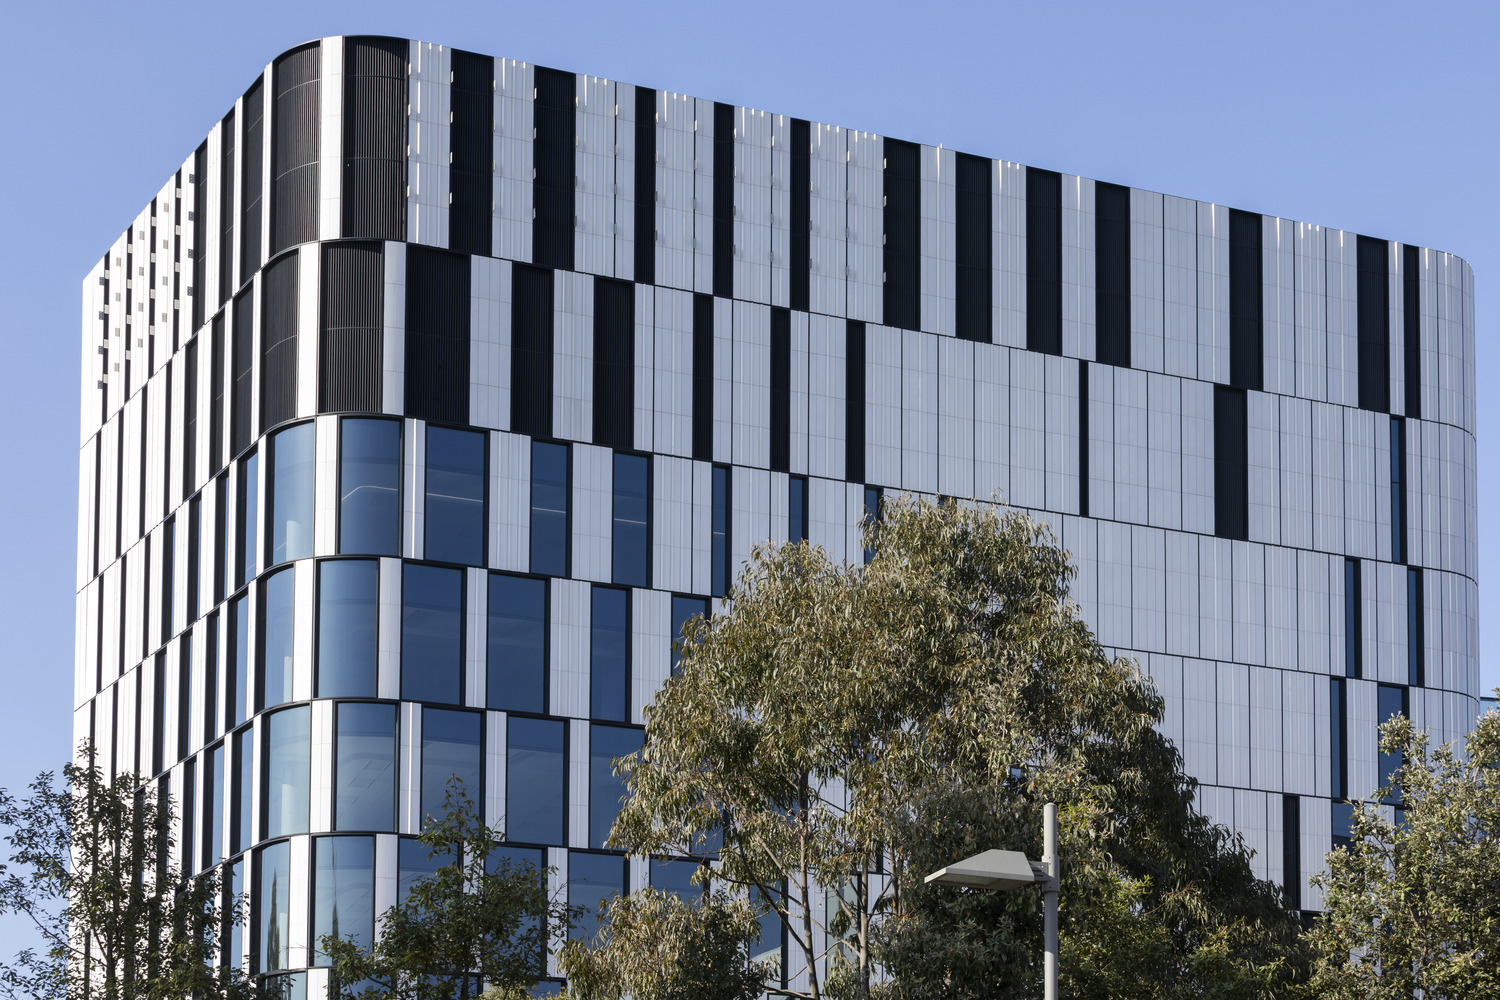 Shell House has been awarded an Australian Engineering Excellence Award